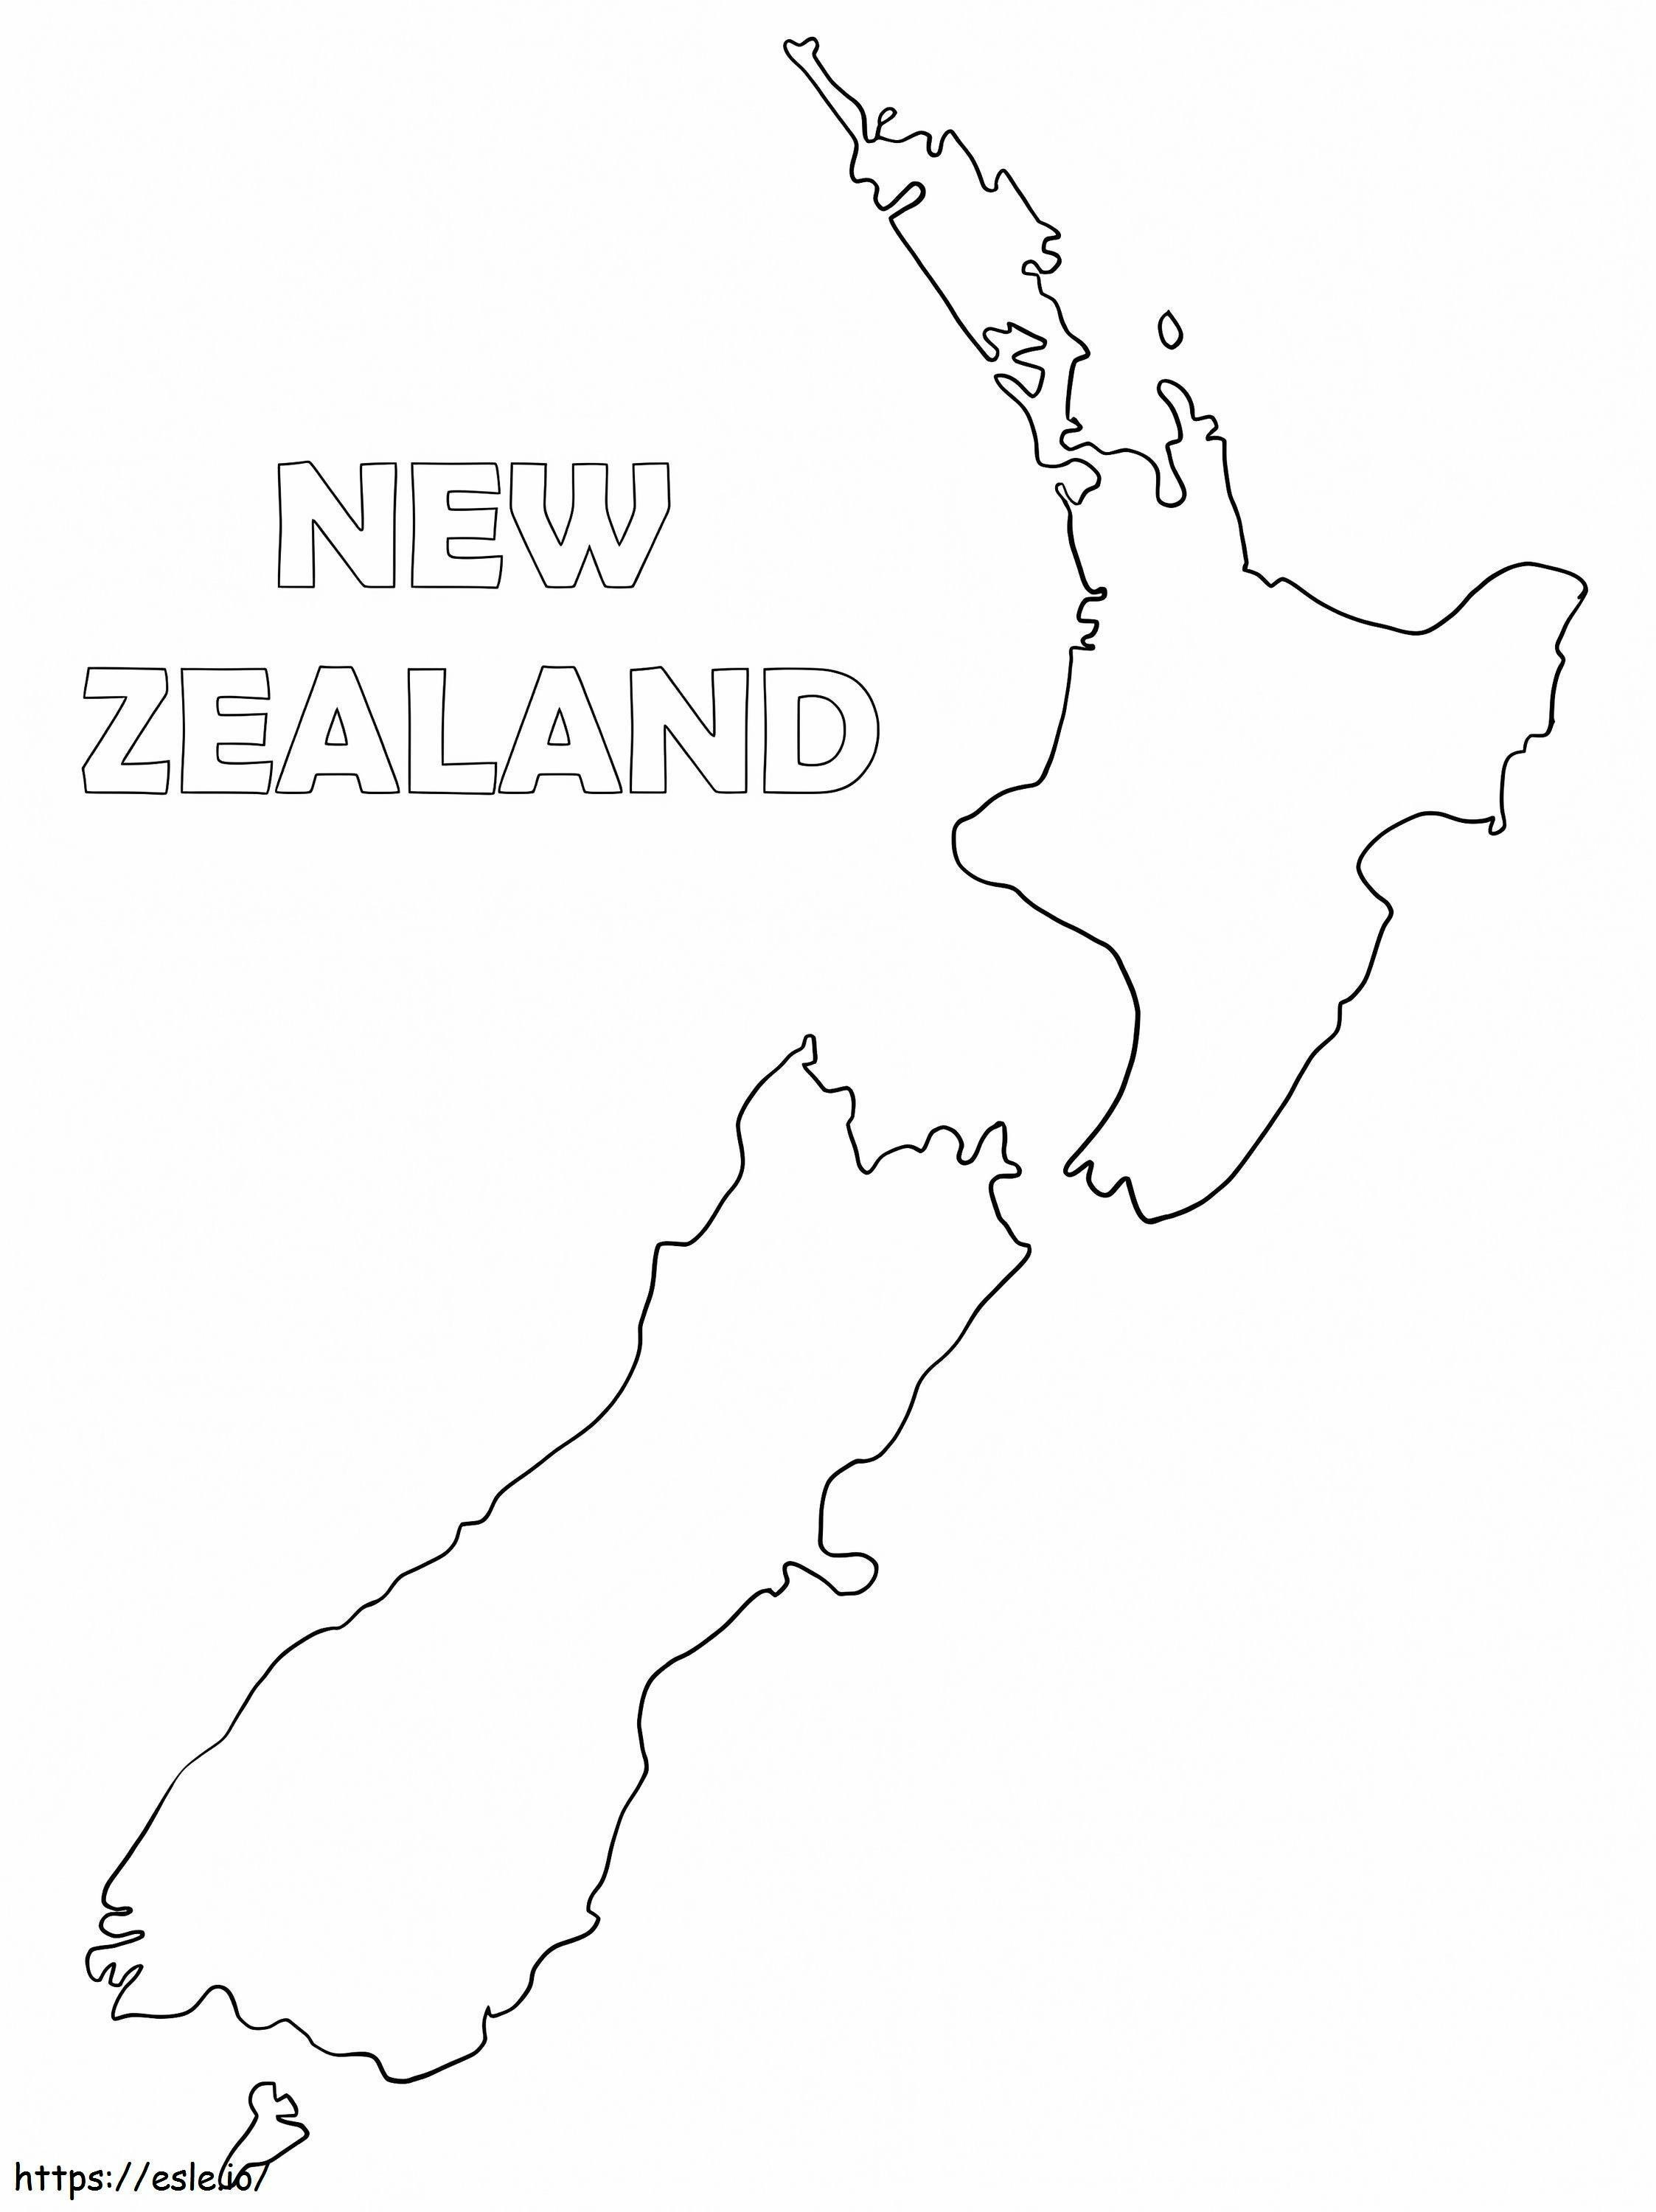 New Zealand Map 1 coloring page